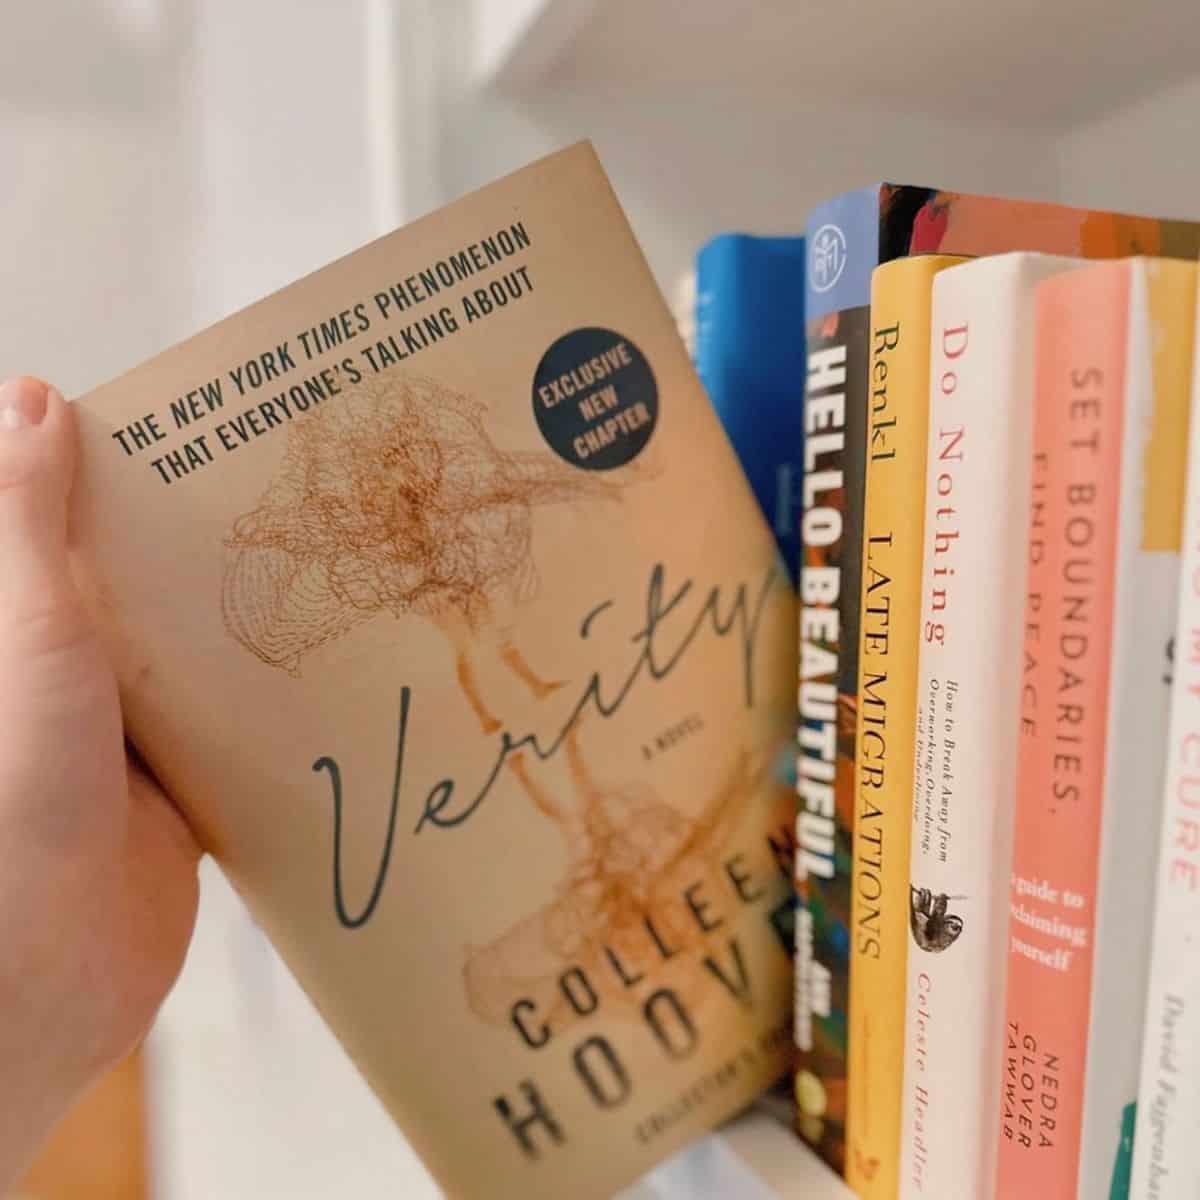 Colleen Hoover’s Verity: Trigger Warnings and Age Rating